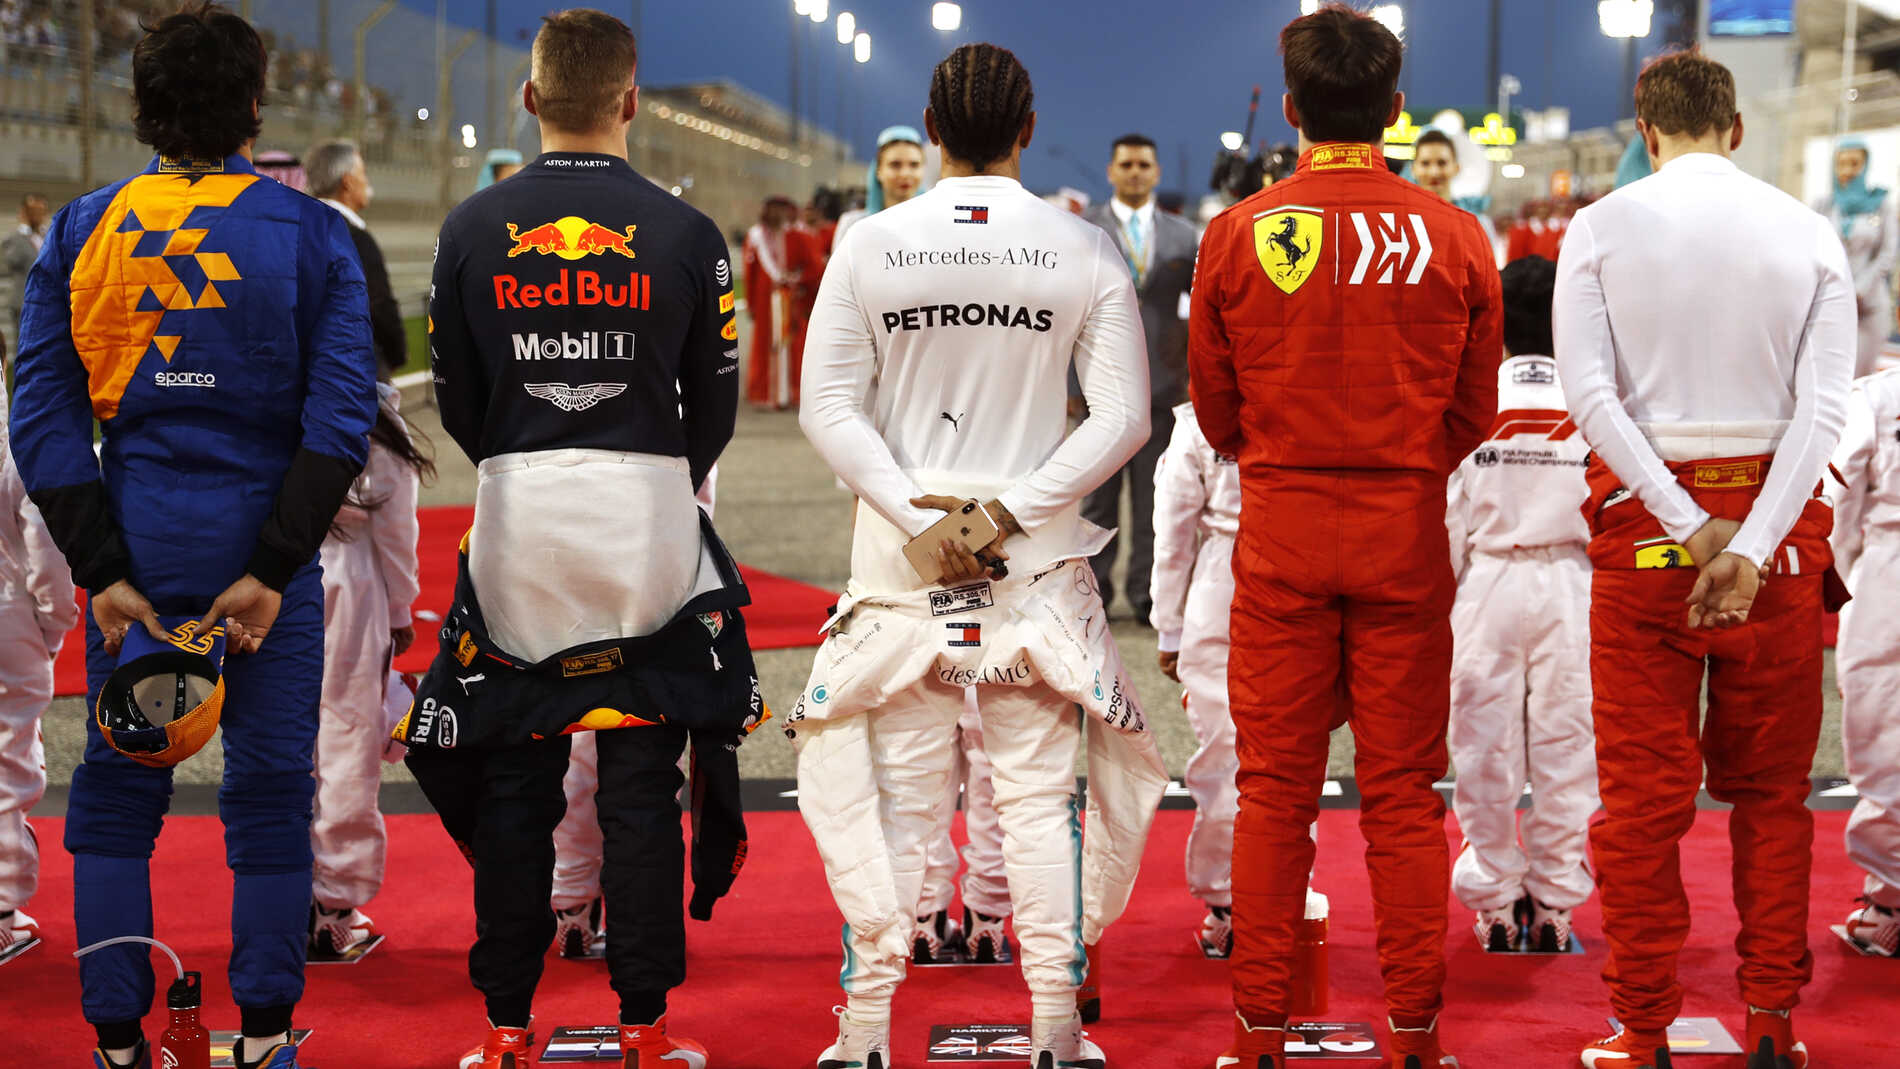 Best F1 2019: The Top 10 F1 drivers of chosen by the drivers | Formula 1®